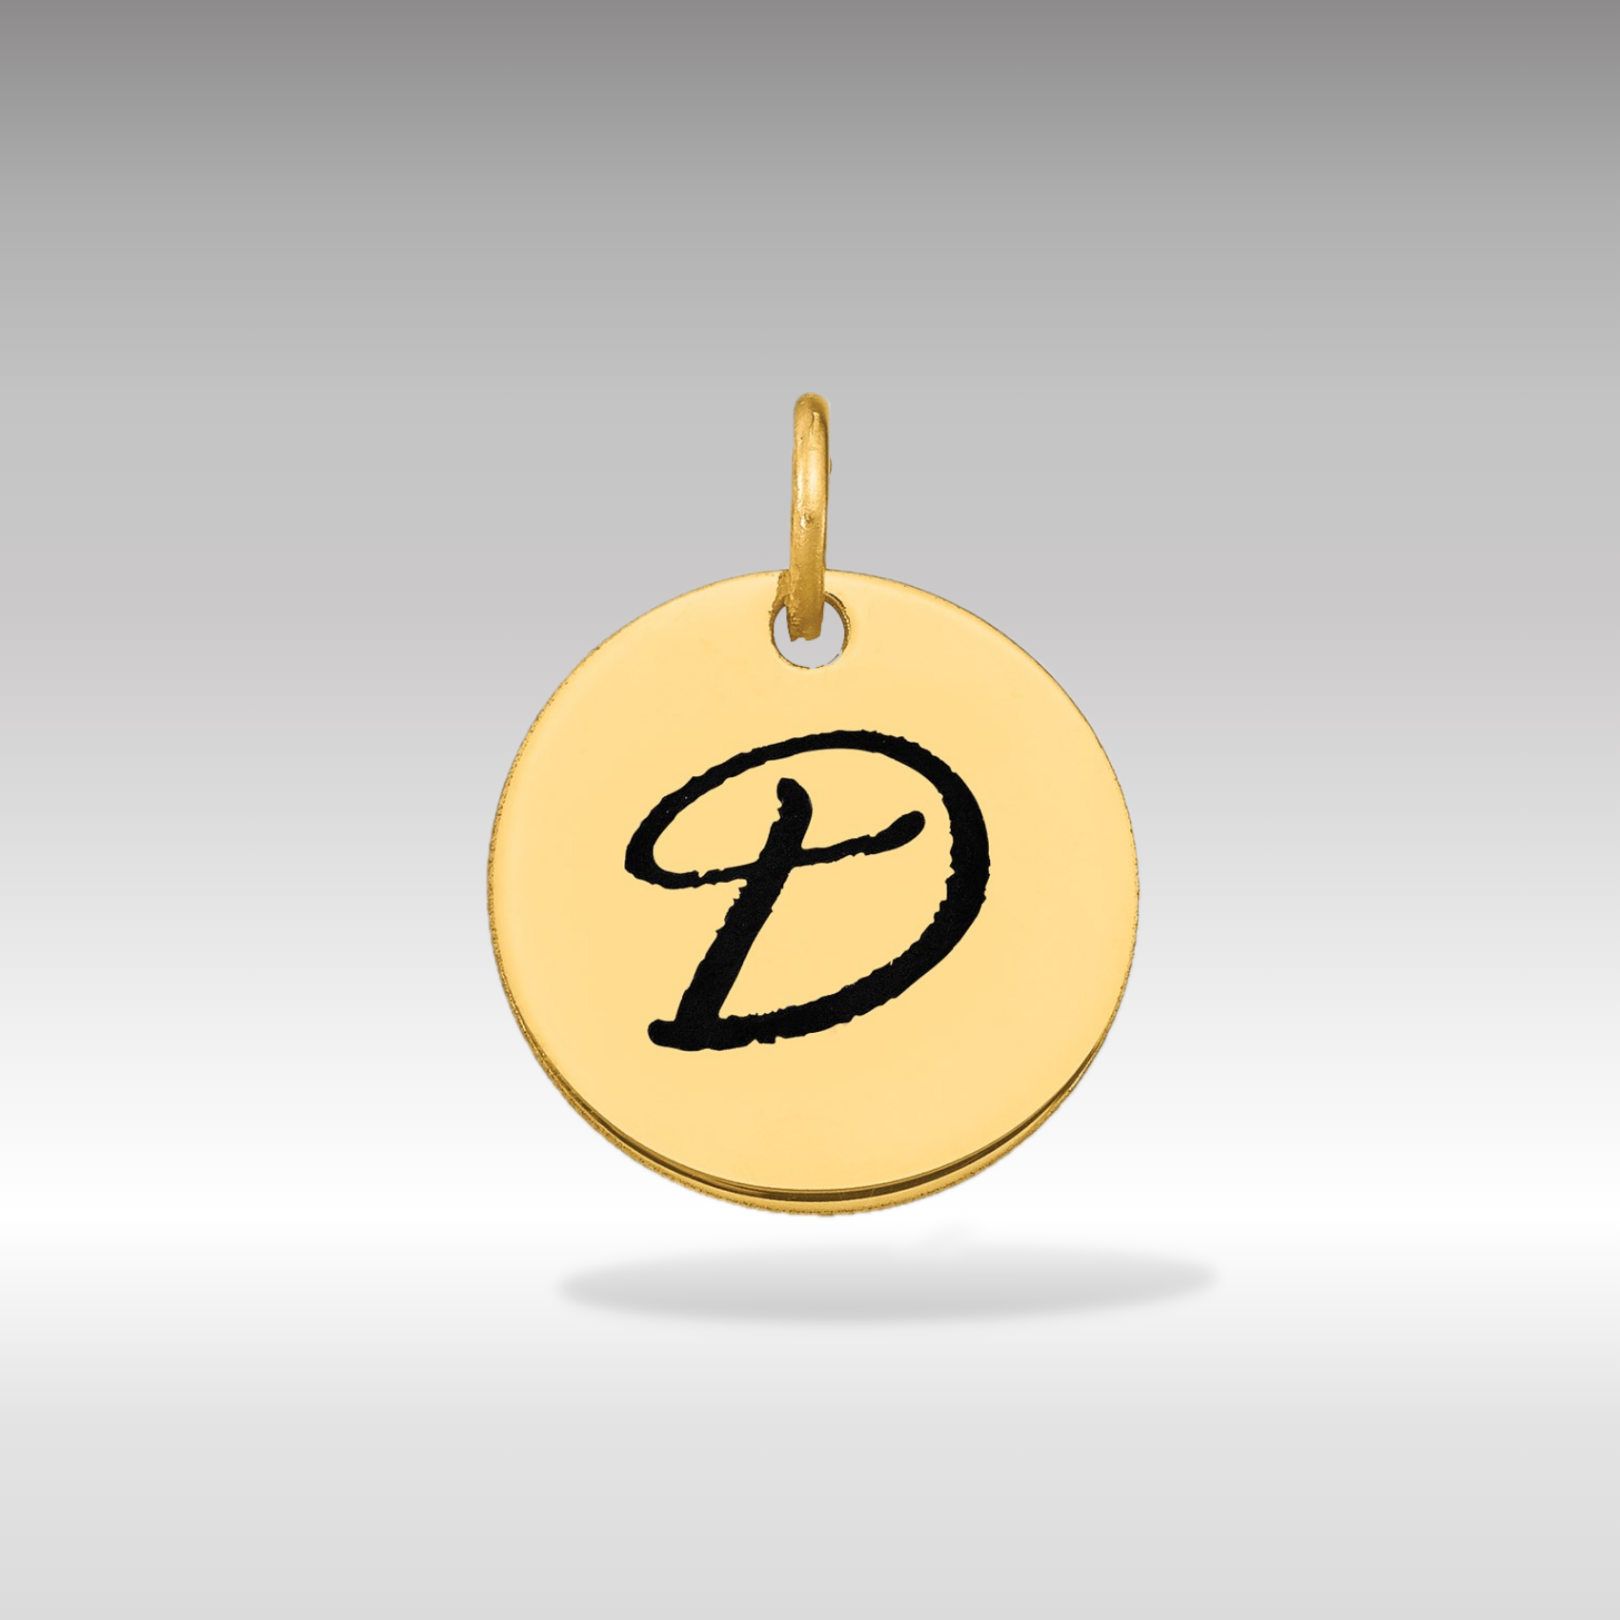 14K Gold Script Letter 'D' Circular Charm with Black Enamel - Charlie & Co. Jewelry